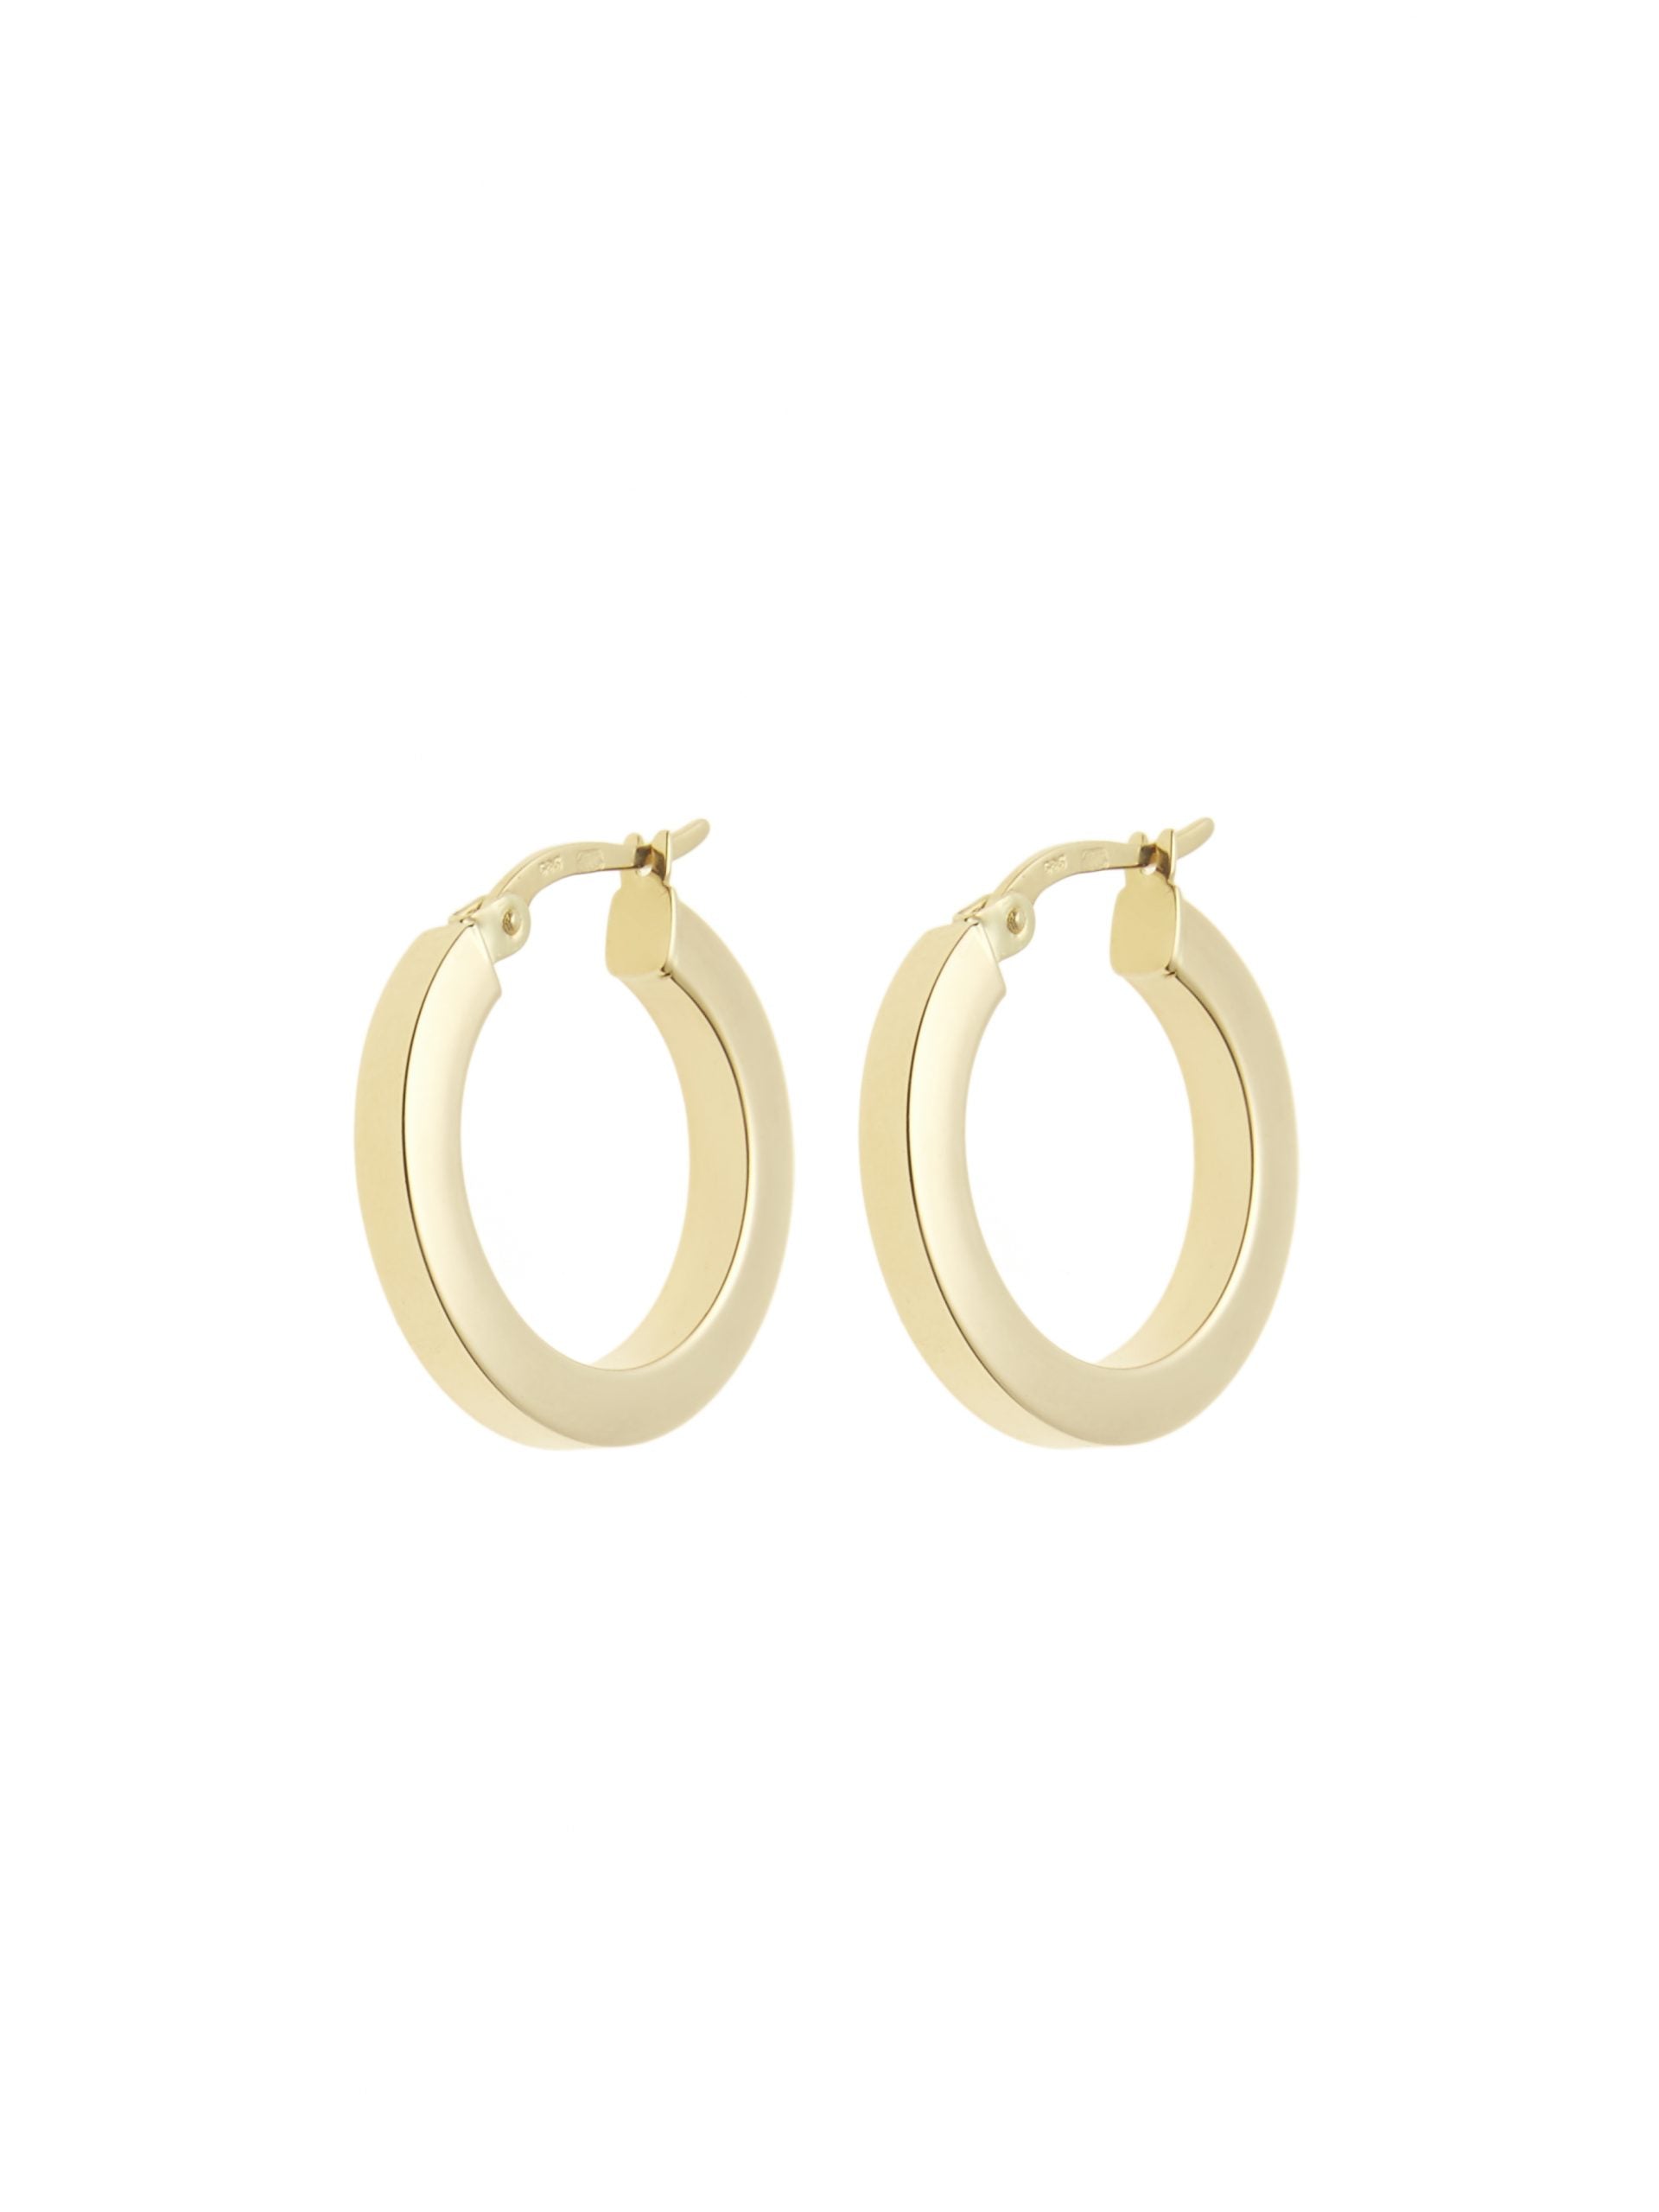 Lightweight Gold Square Hoop Earrings 14 ct gold - 21 mm